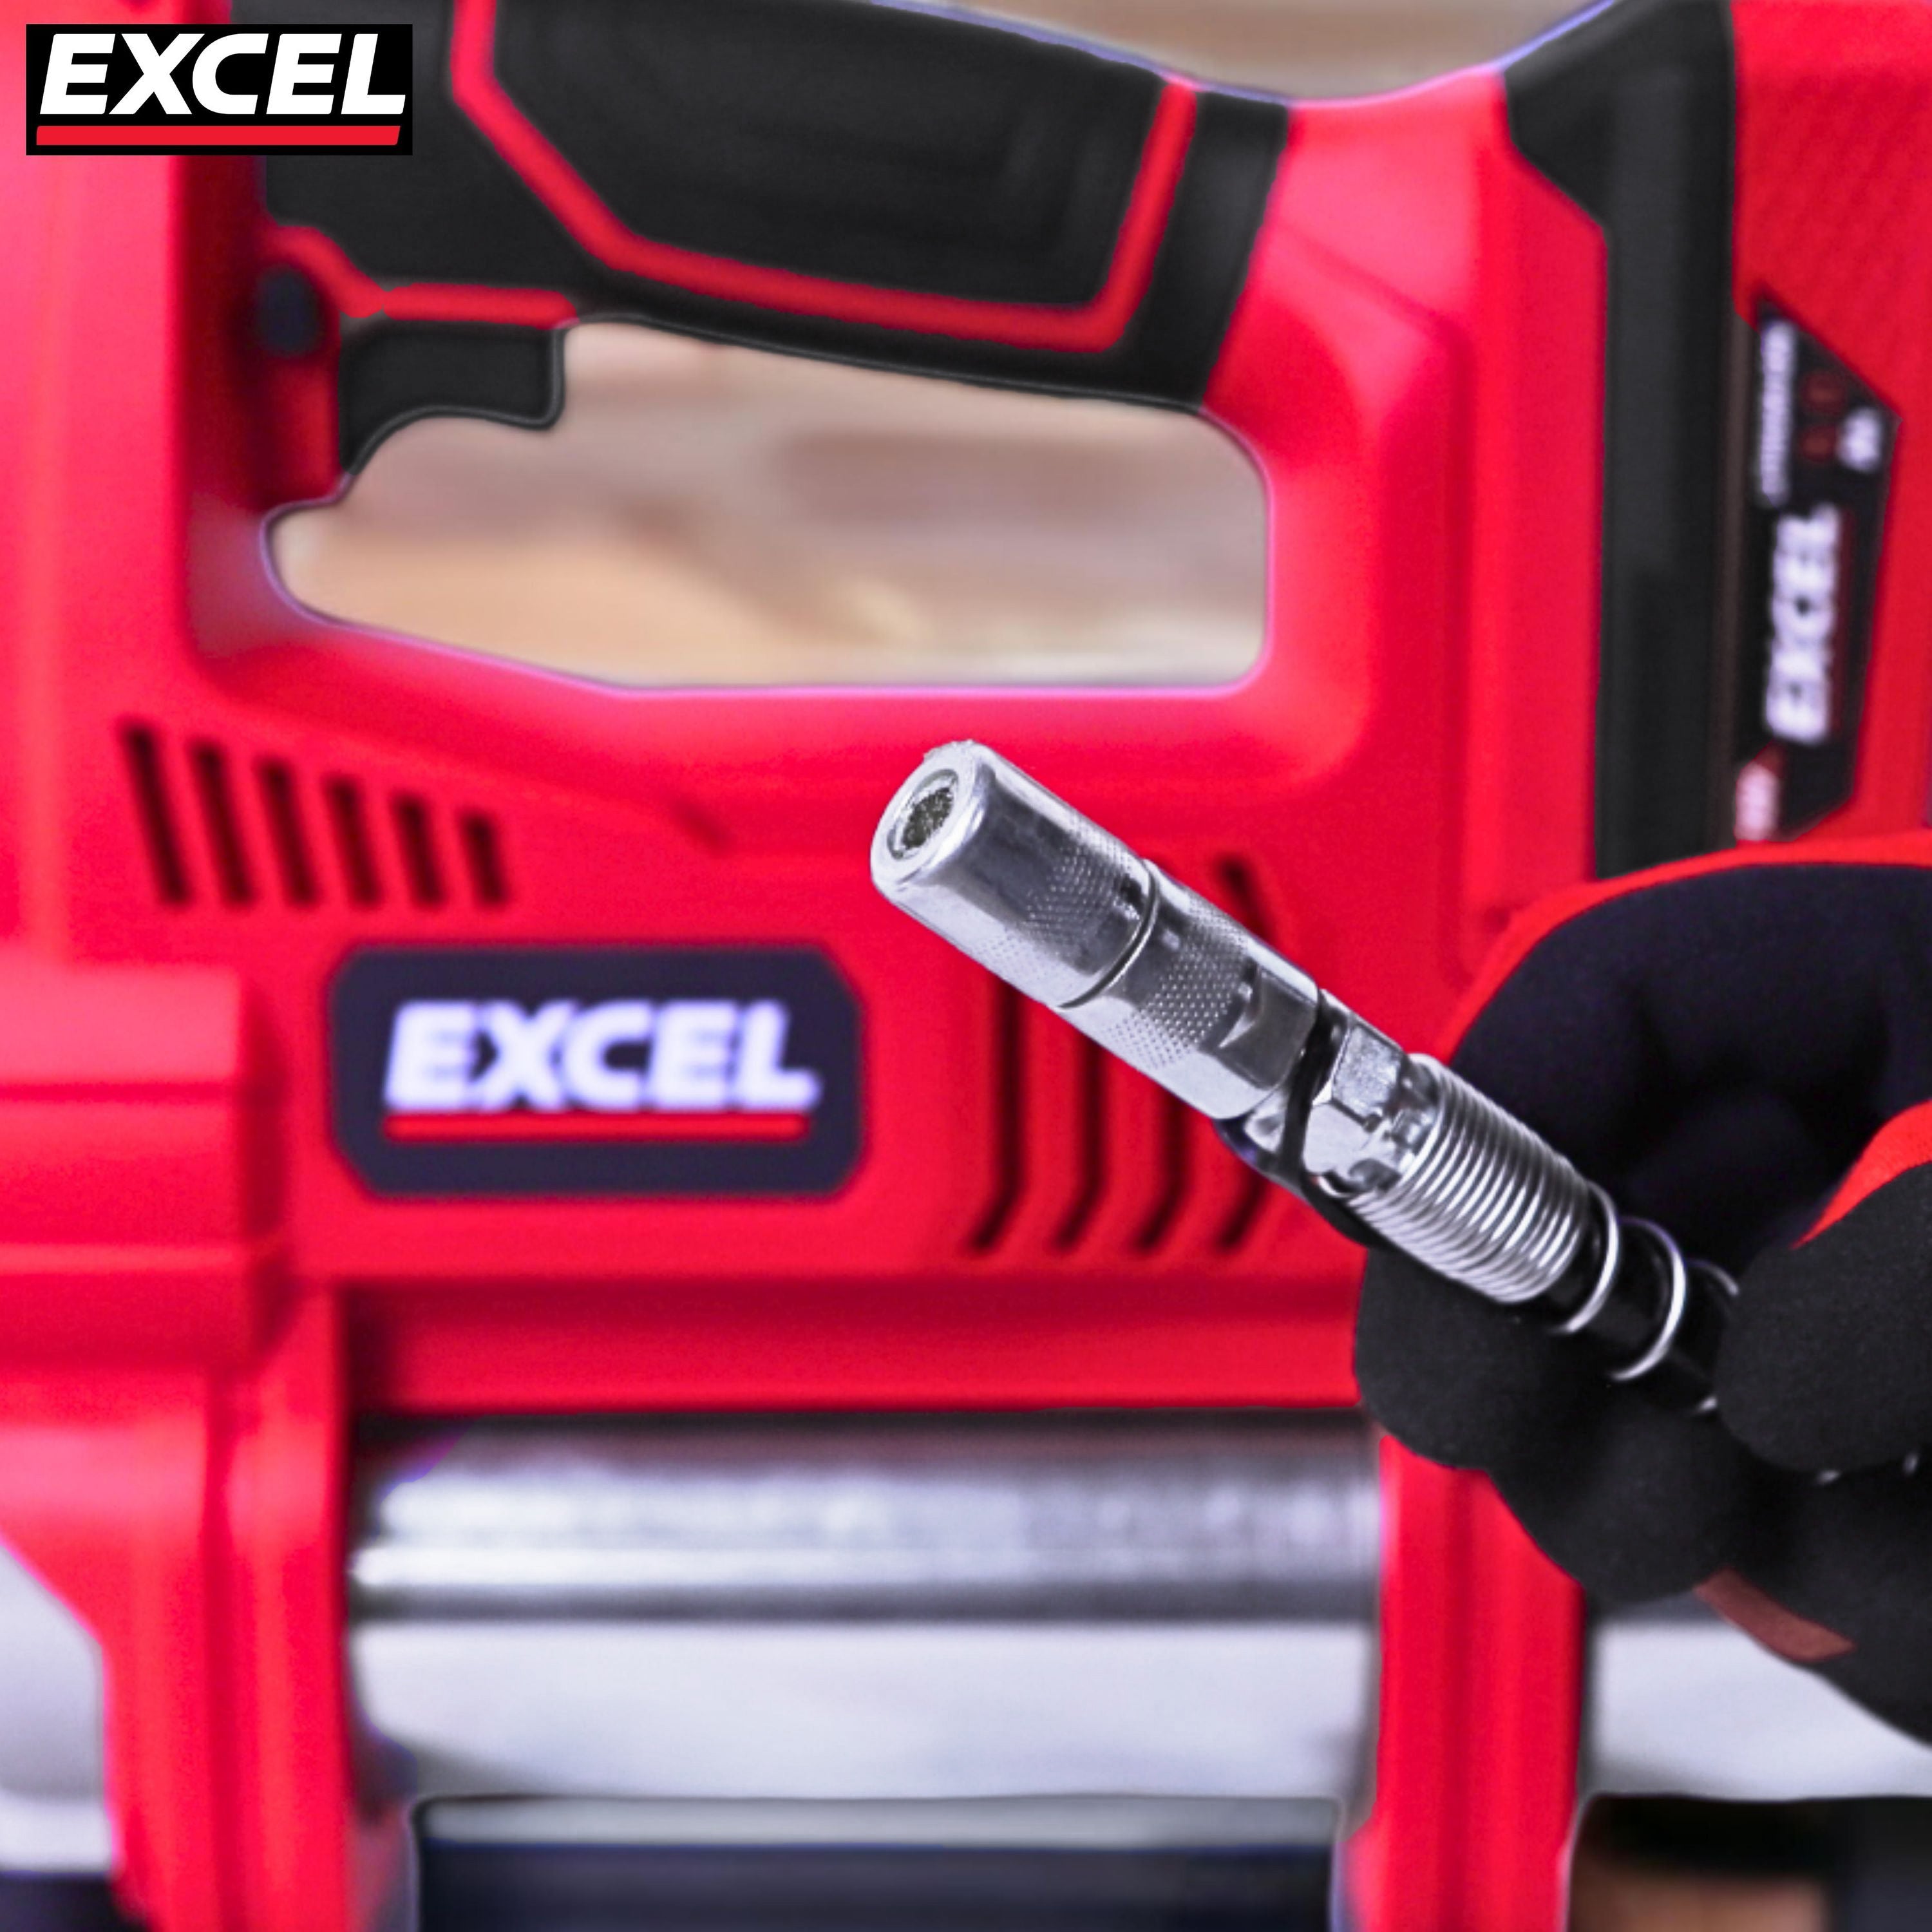 Excel 18V Cordless Grease Gun Body Only (Battery & Charger Not Included)